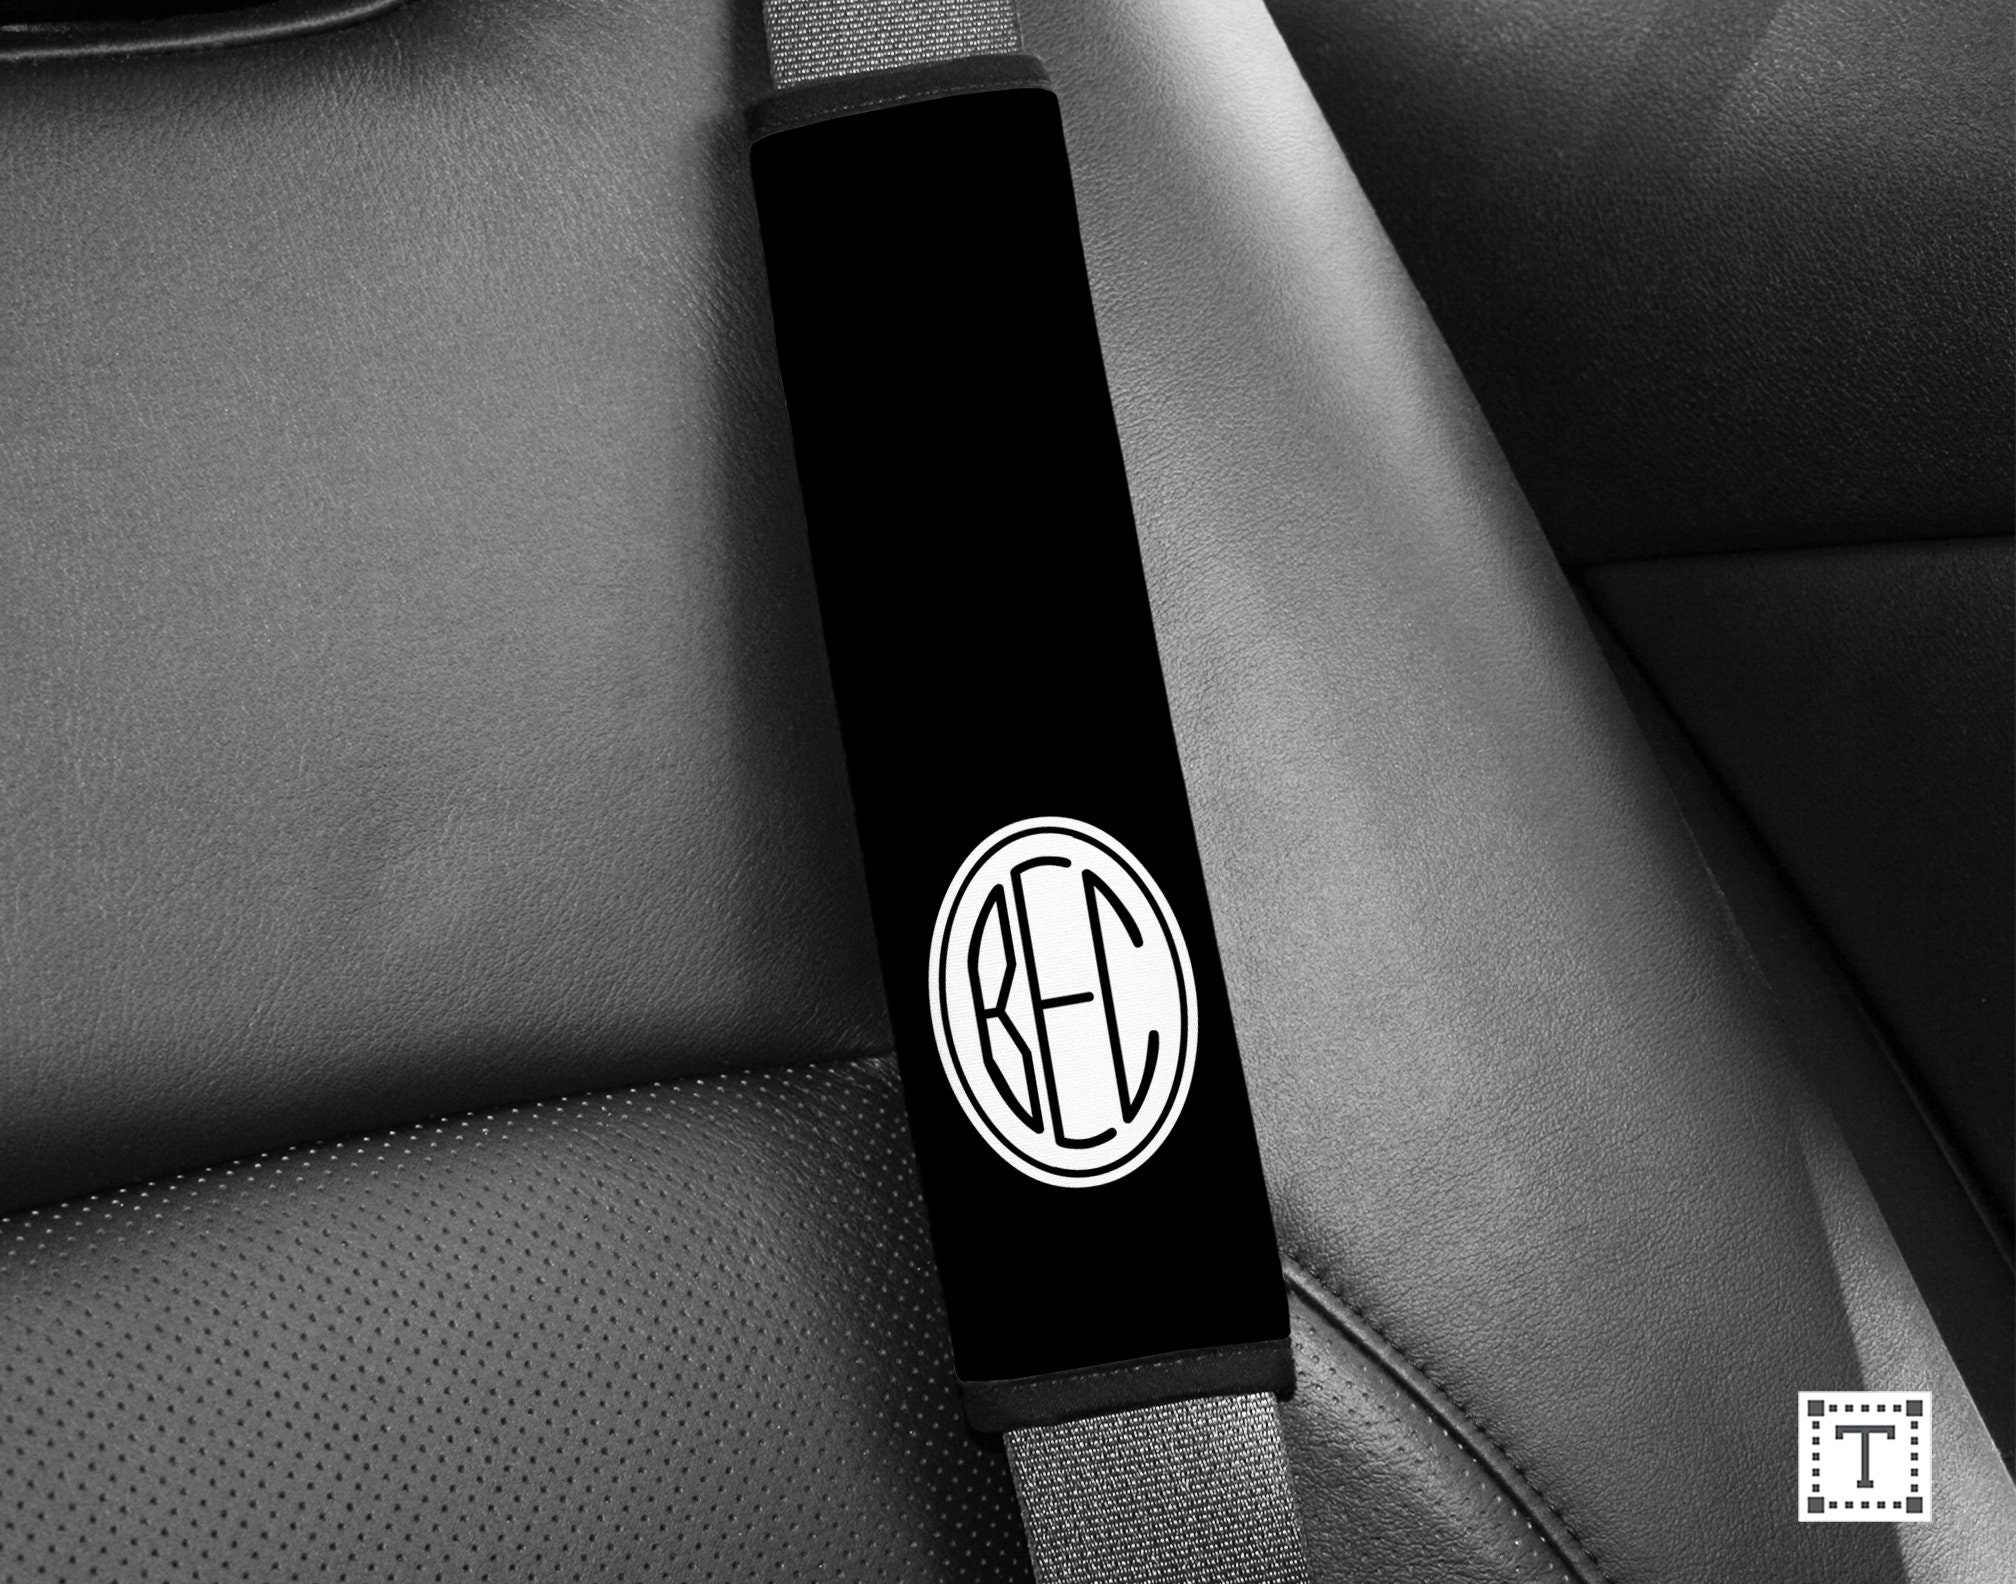 Custom Seat Belt Cover, Monogram Seat Belt Pad, Personalized, Car  Accessories, New Driver, Auto, Safety, Allergy Notice, Medical Alert, Car 